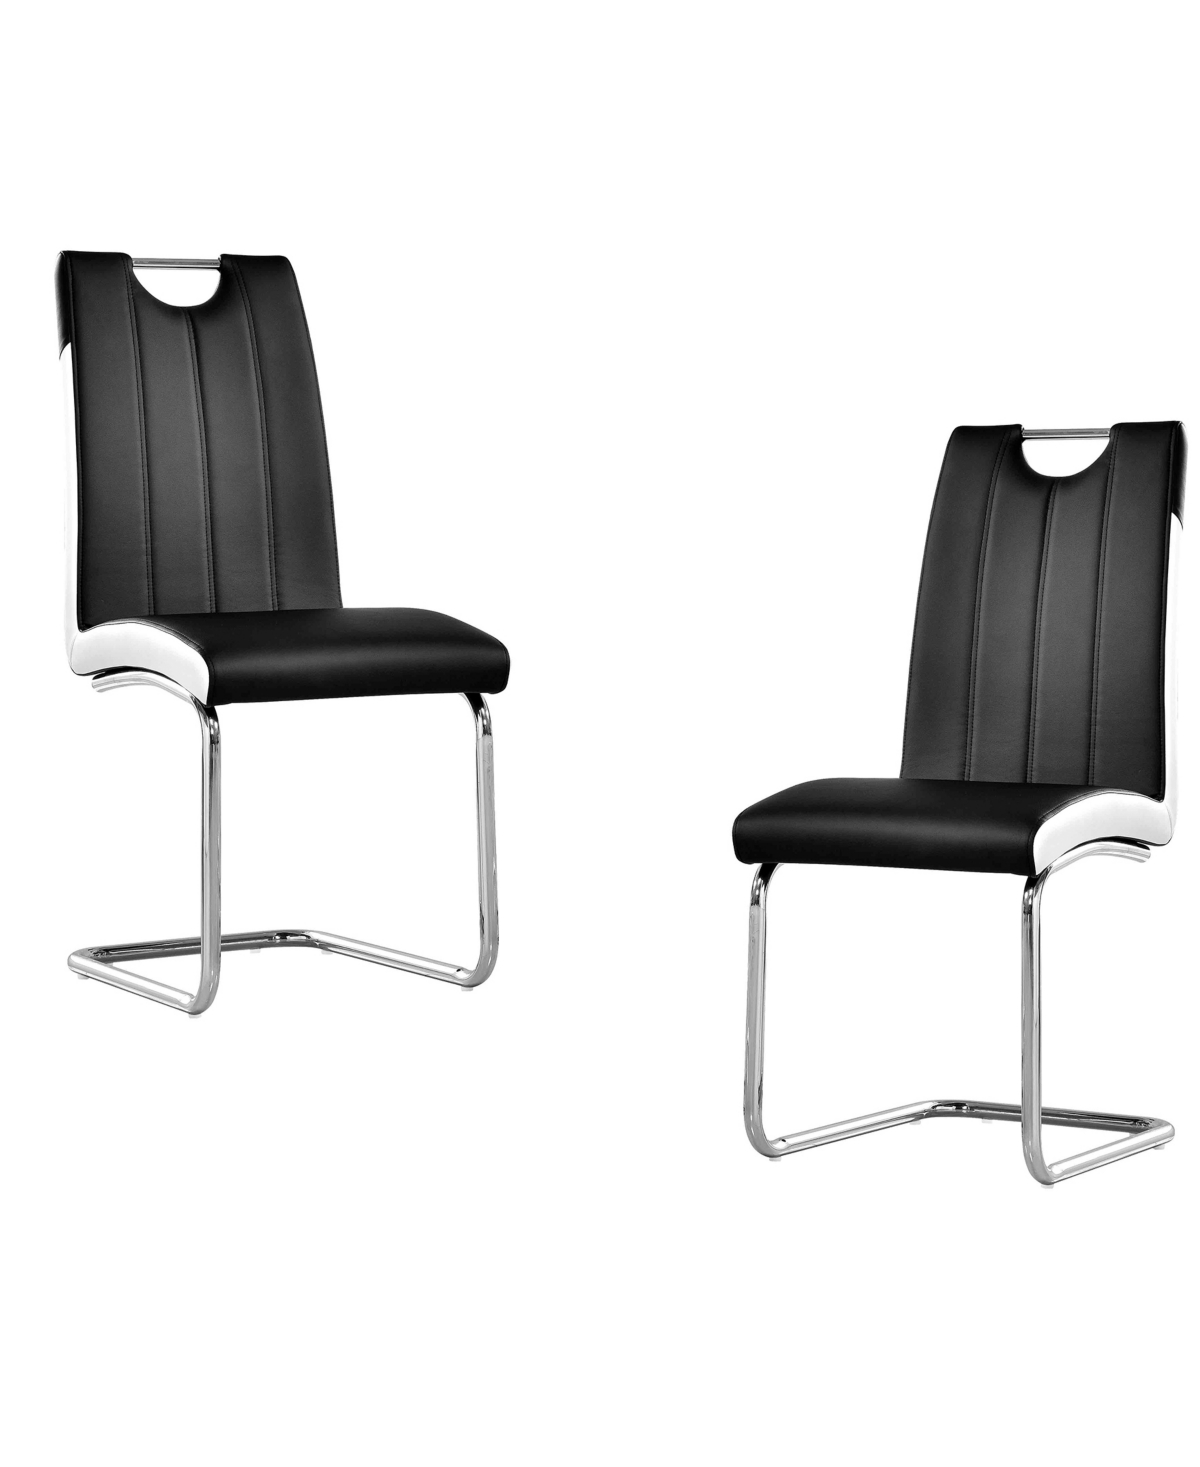 Bono Upholstered Modern Side Chairs, Set of 2